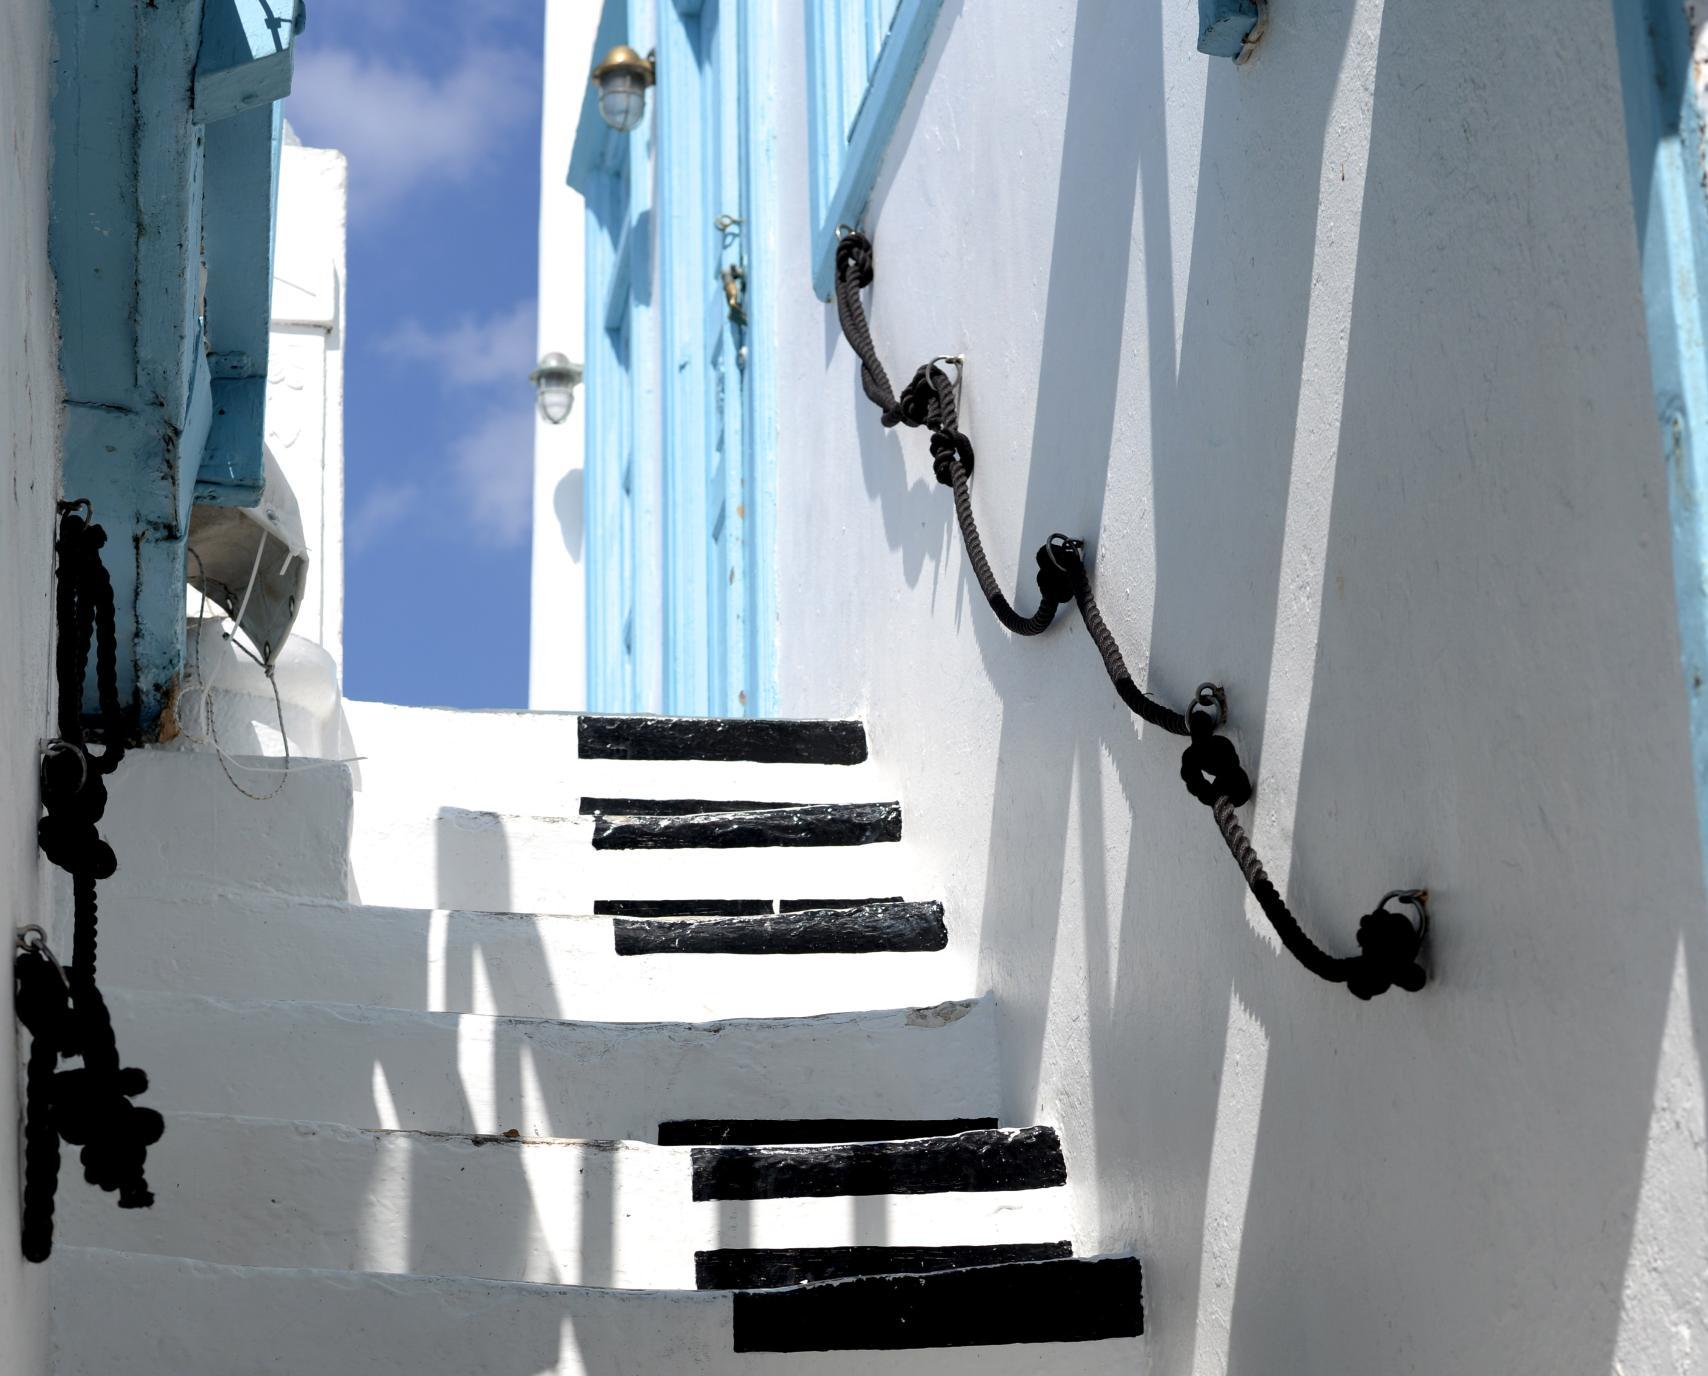 Greek alley, whitewashed walls, blue windows and doors. A staircase leads up, black piano keys are painted on the white steps.